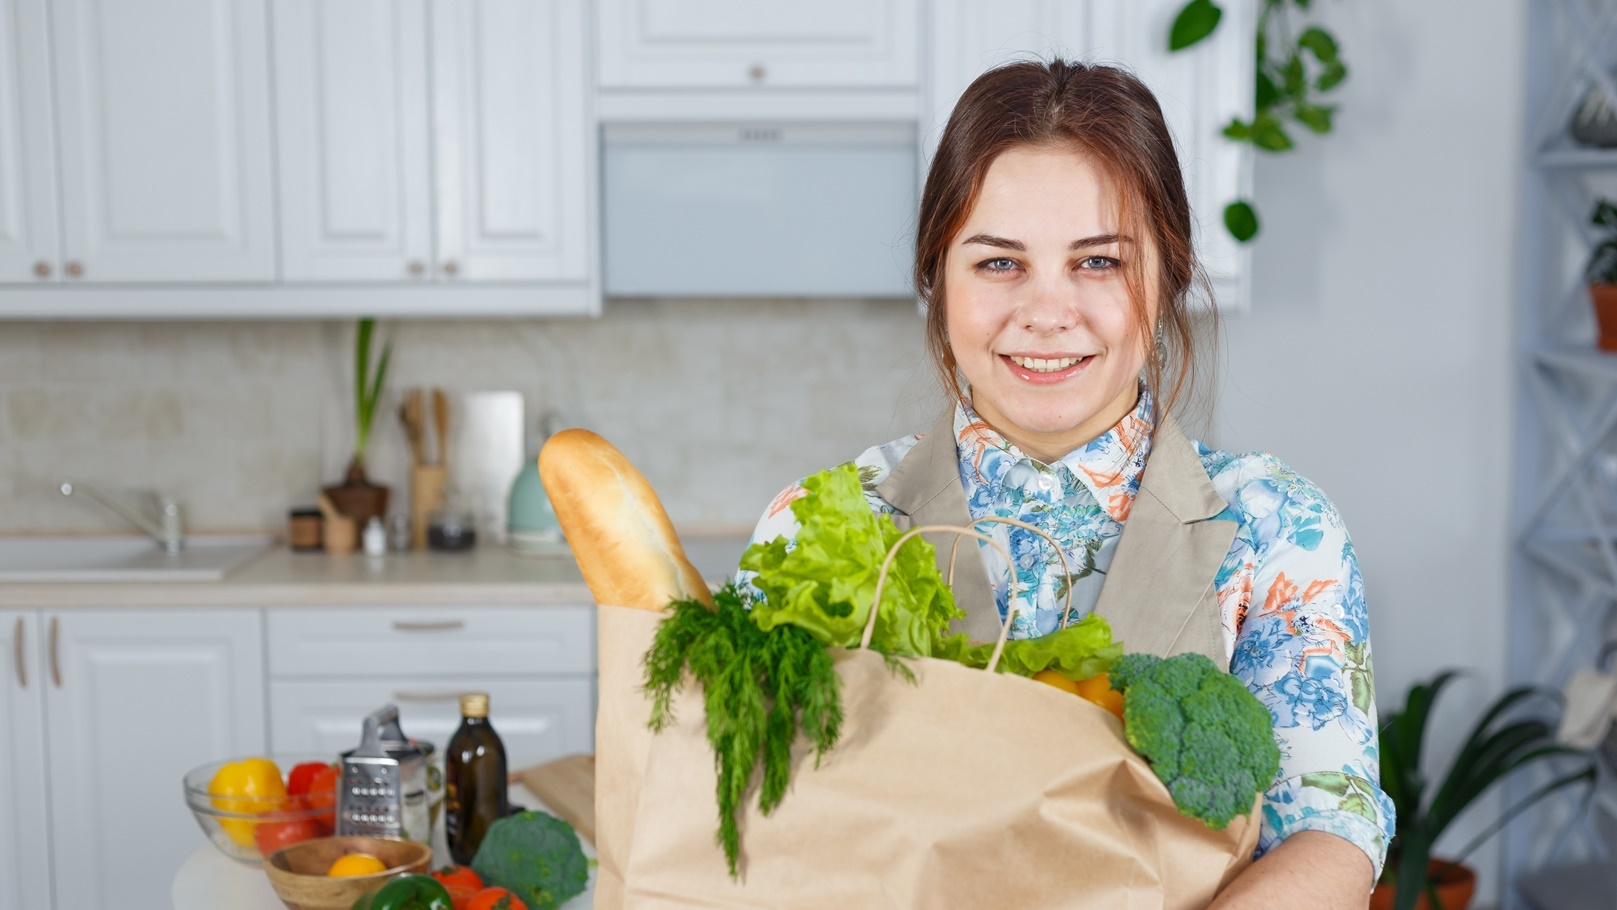 smiling-woman-in-the-kitchen-with-a-bag-of-groceri-2021-08-26-17-11-02-utc